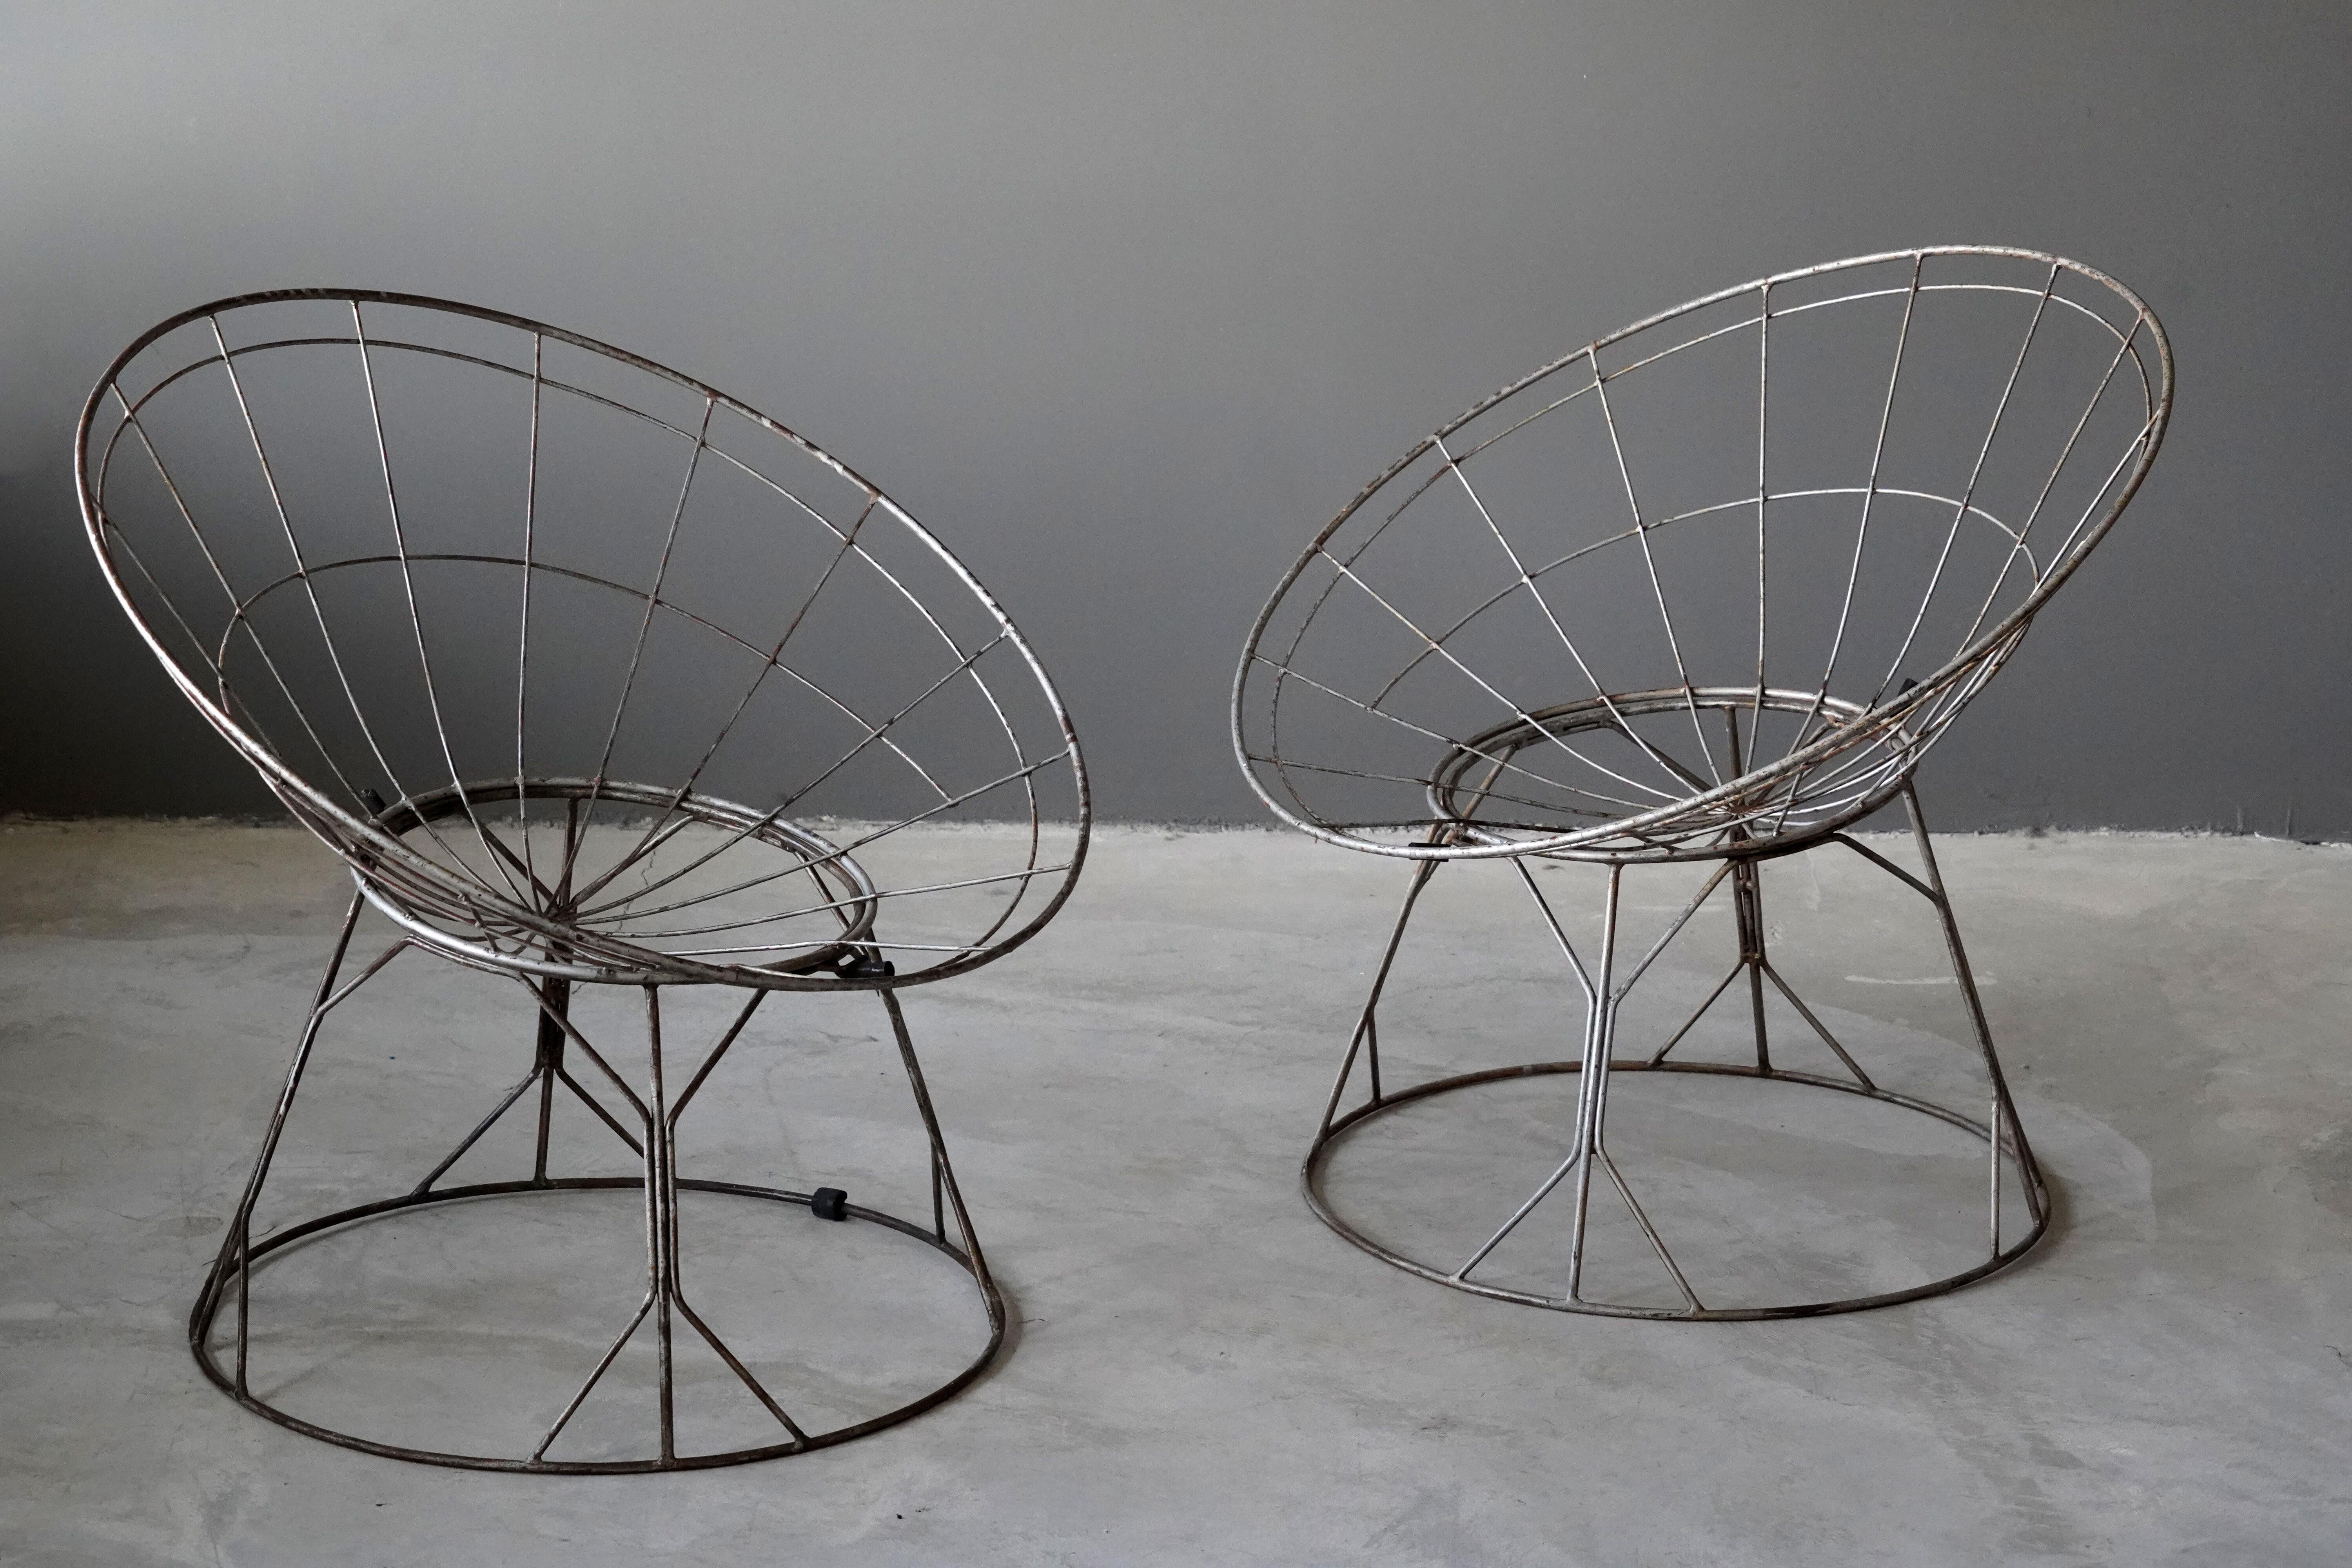 A set of adjustable lounge chairs / Garden chairs, in painted steel. Likely all original. Produced circa 1950s, America. Can be adjusted for a more upright or a more reclined position.

Other designers of the period include Buckminster Fuller,